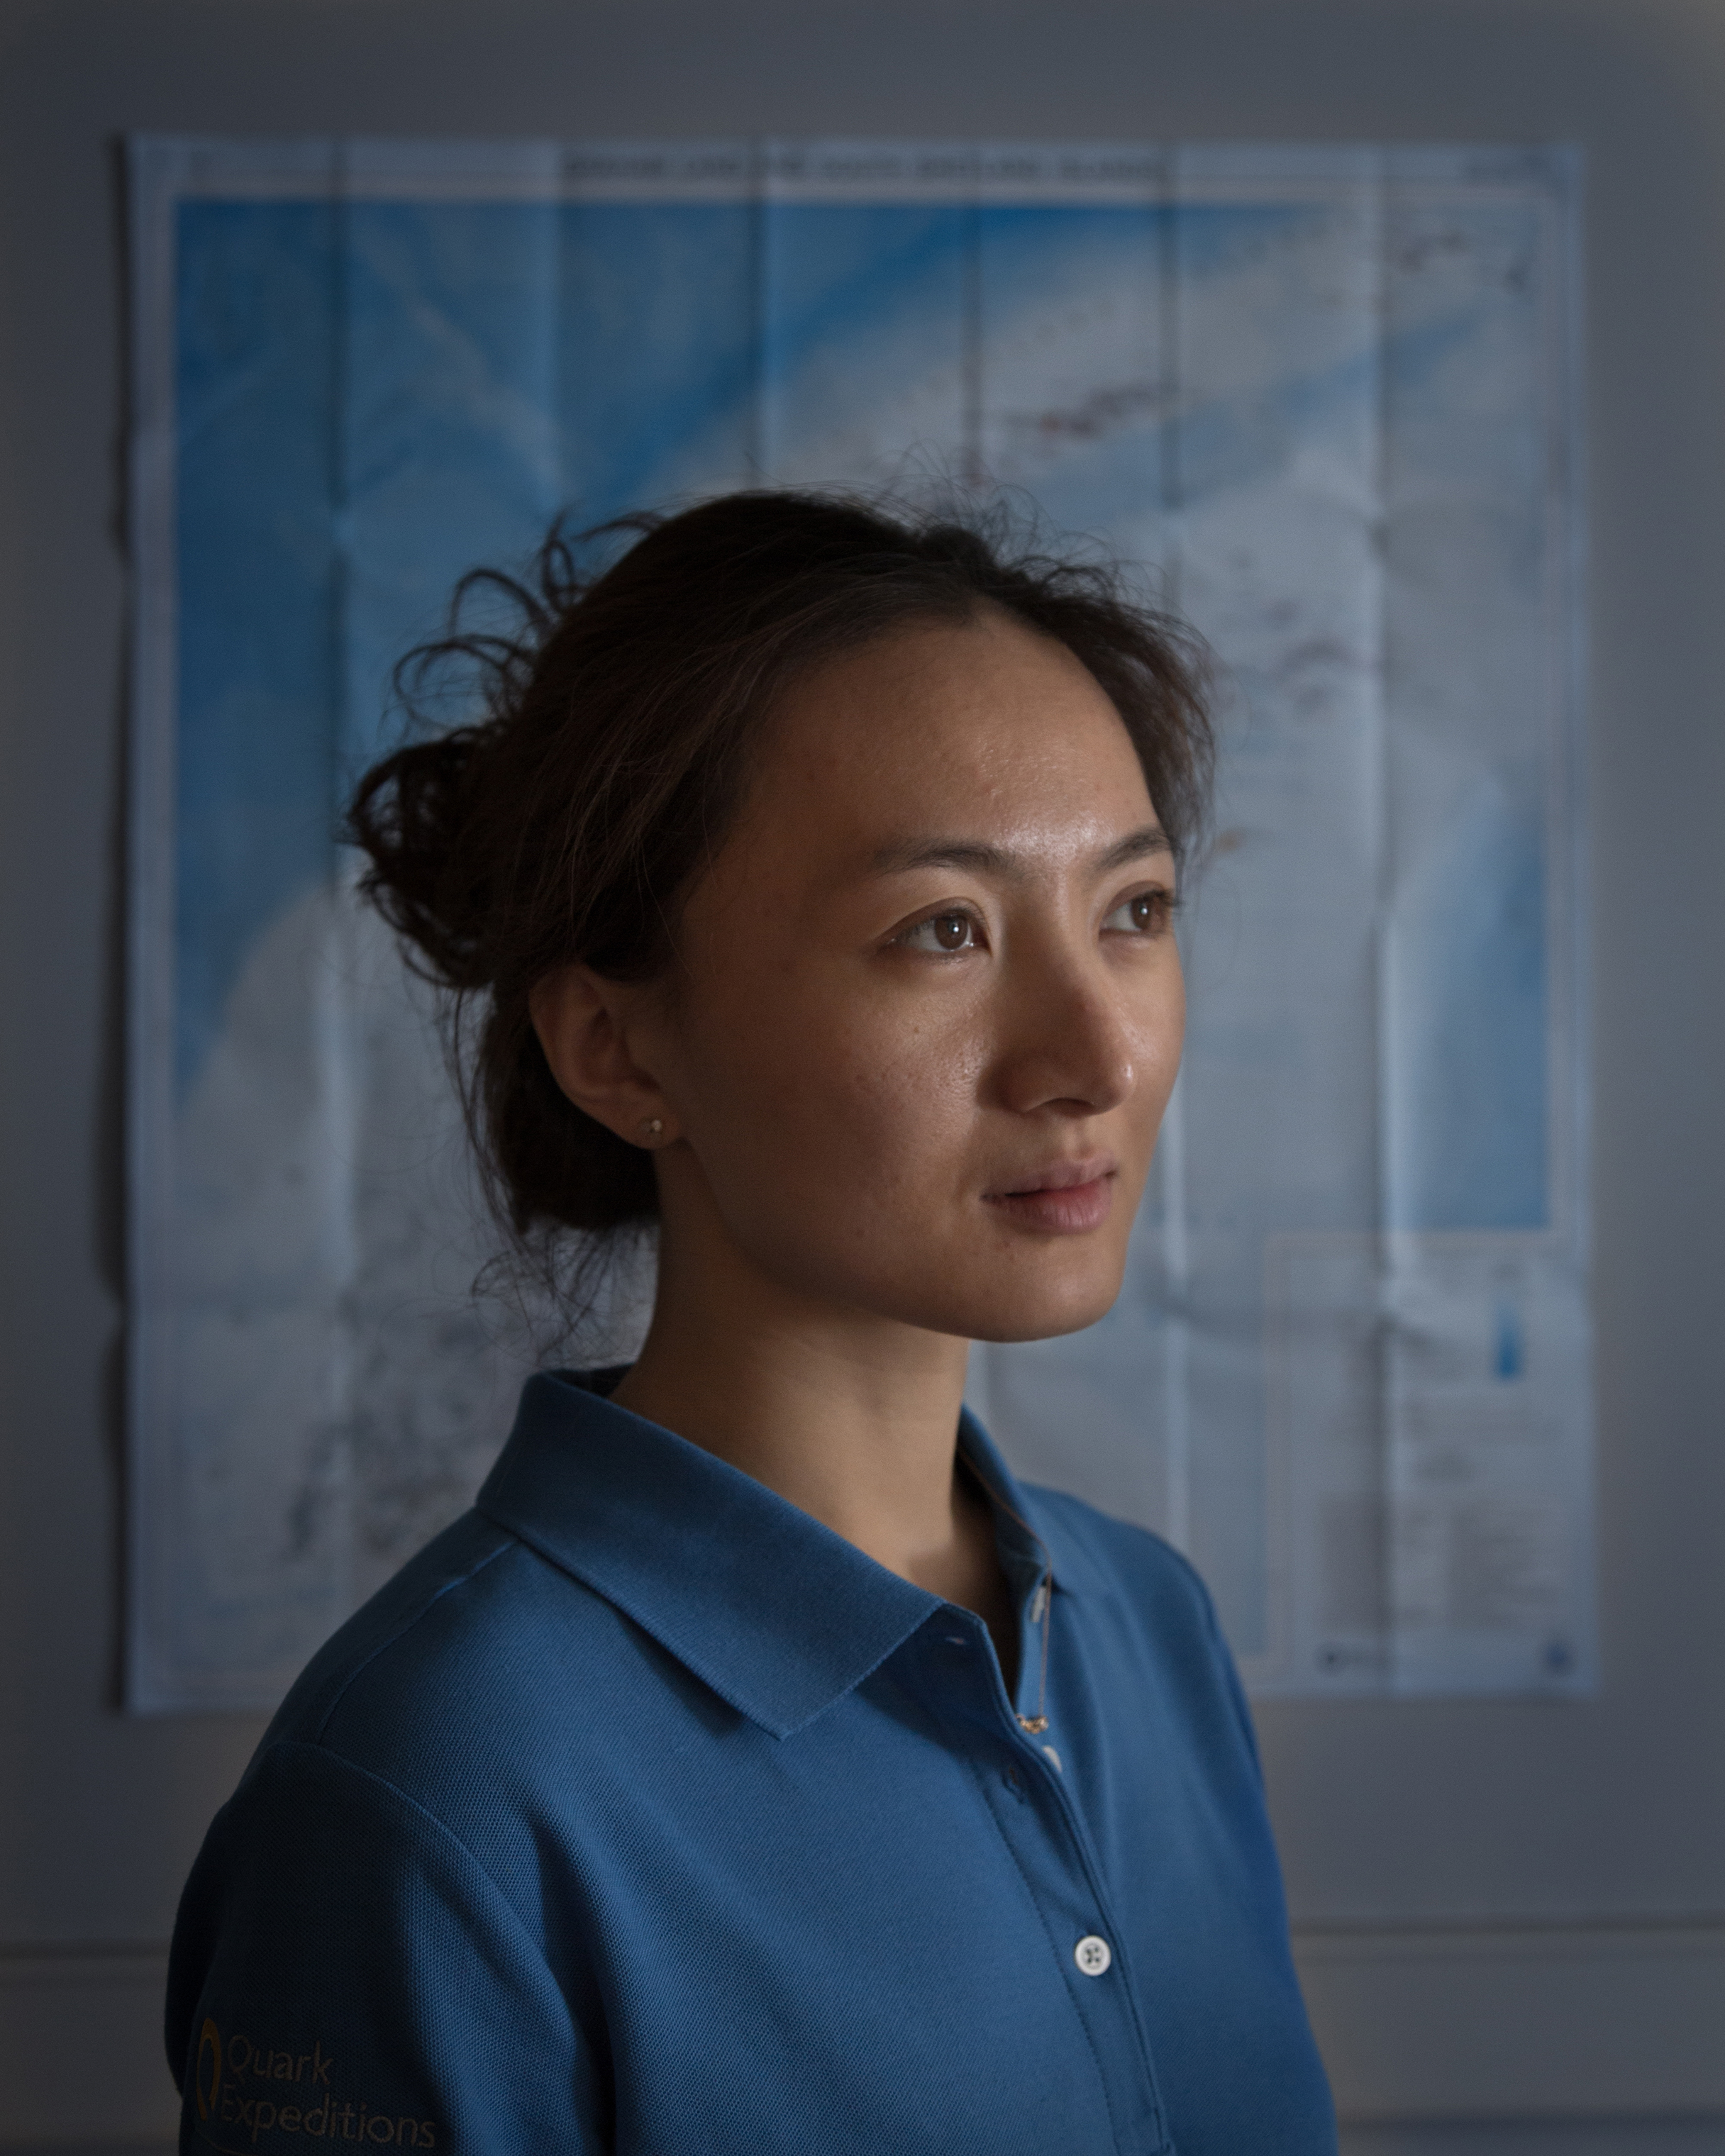 Jiayi Zhao, an actress and dancer from Beijing, works as a Mandarin translator and expedition guide. She has guided extensively at both poles